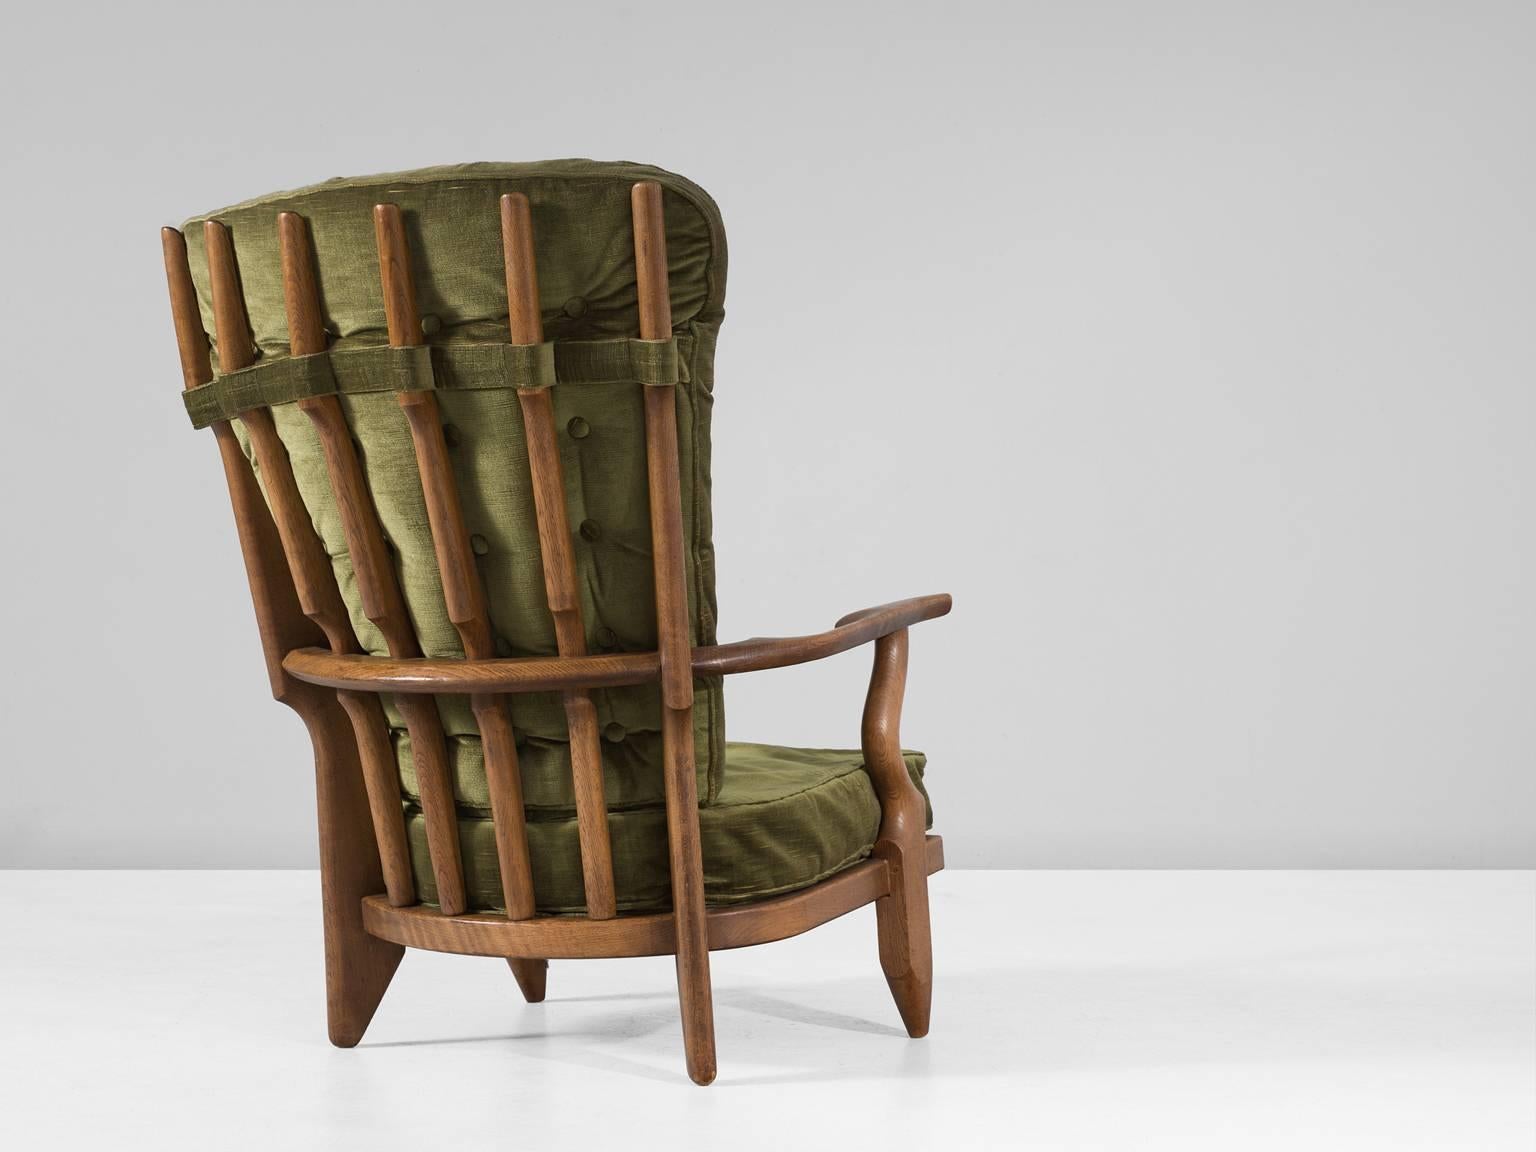 'Grand Repos' lounge chair in oak and fabric, by Guillerme et Chambron, France, 1960. 

High back lounge chair in solid oak with the typical characteristic decorative details at the back and capricious forms of the legs. Very comfortable, great